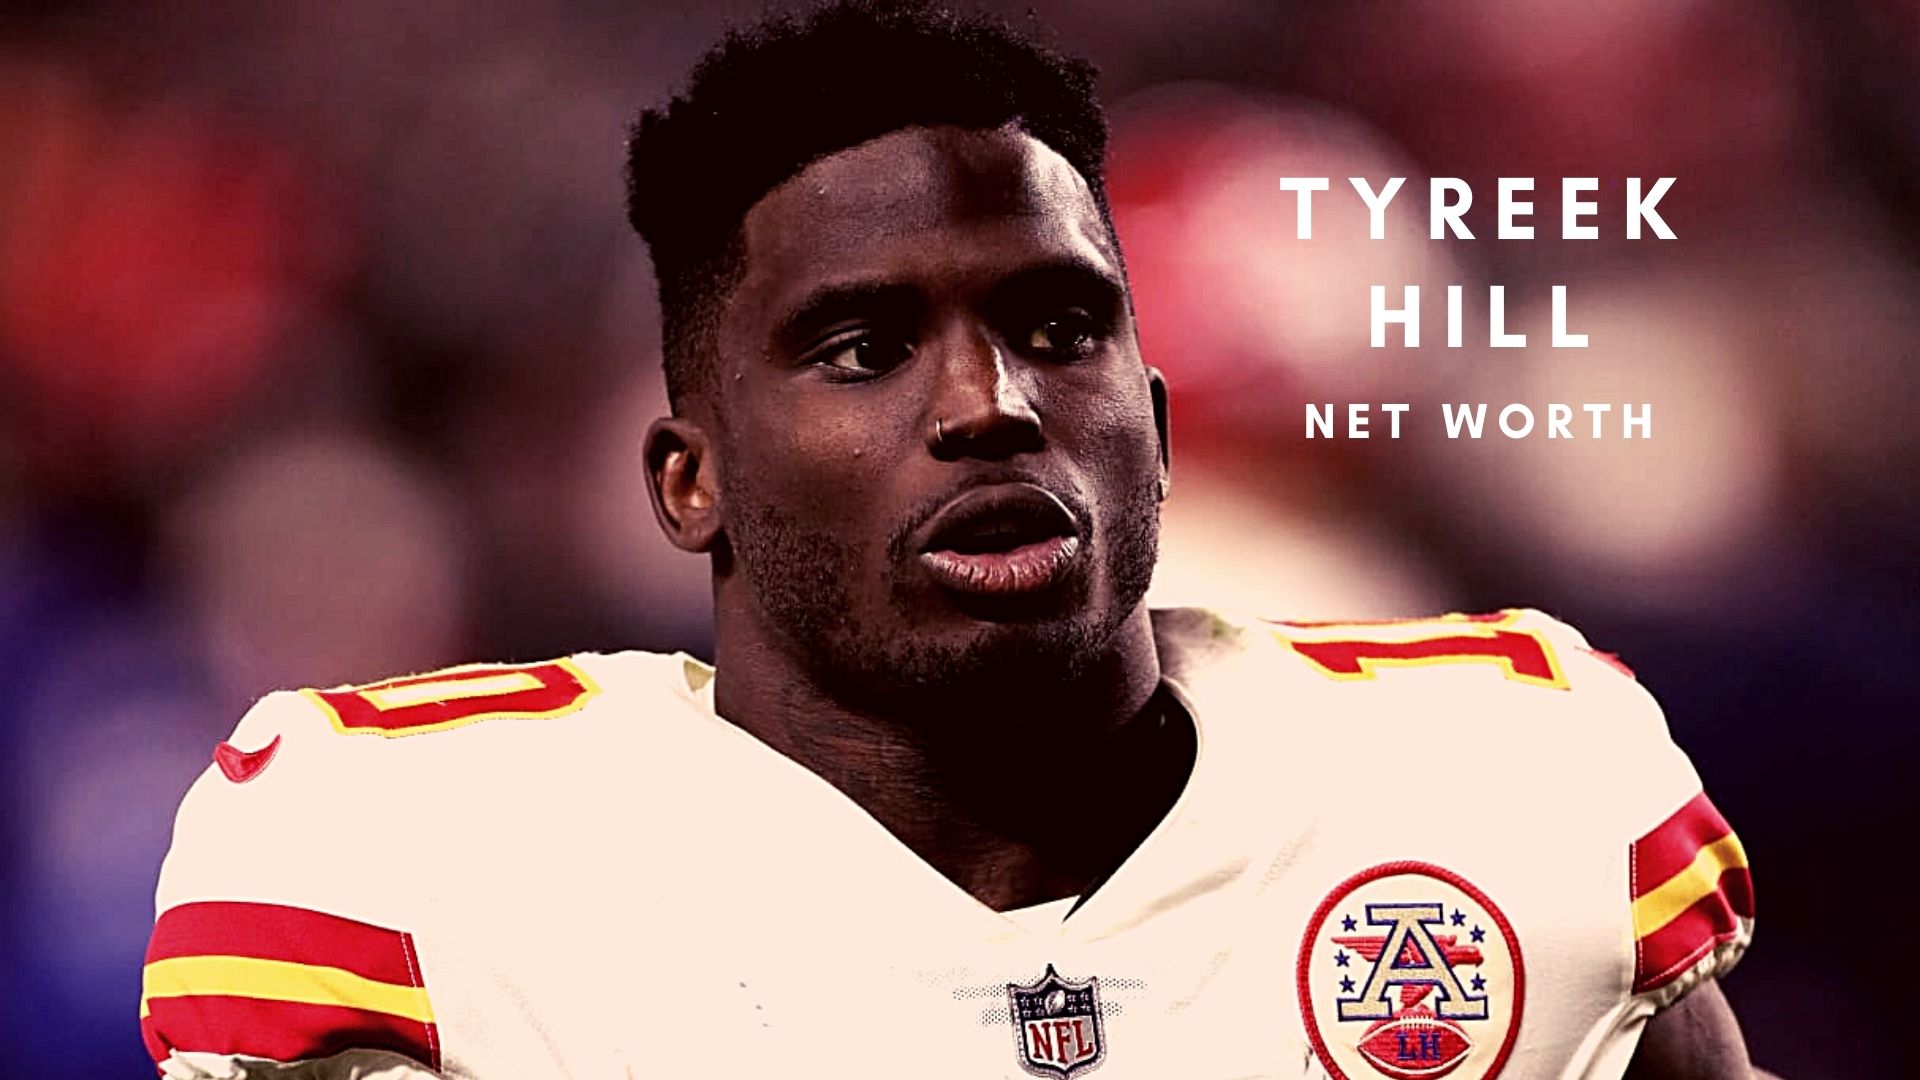 Tyreek Hill 2022 - Net Worth, Contract And Personal Life